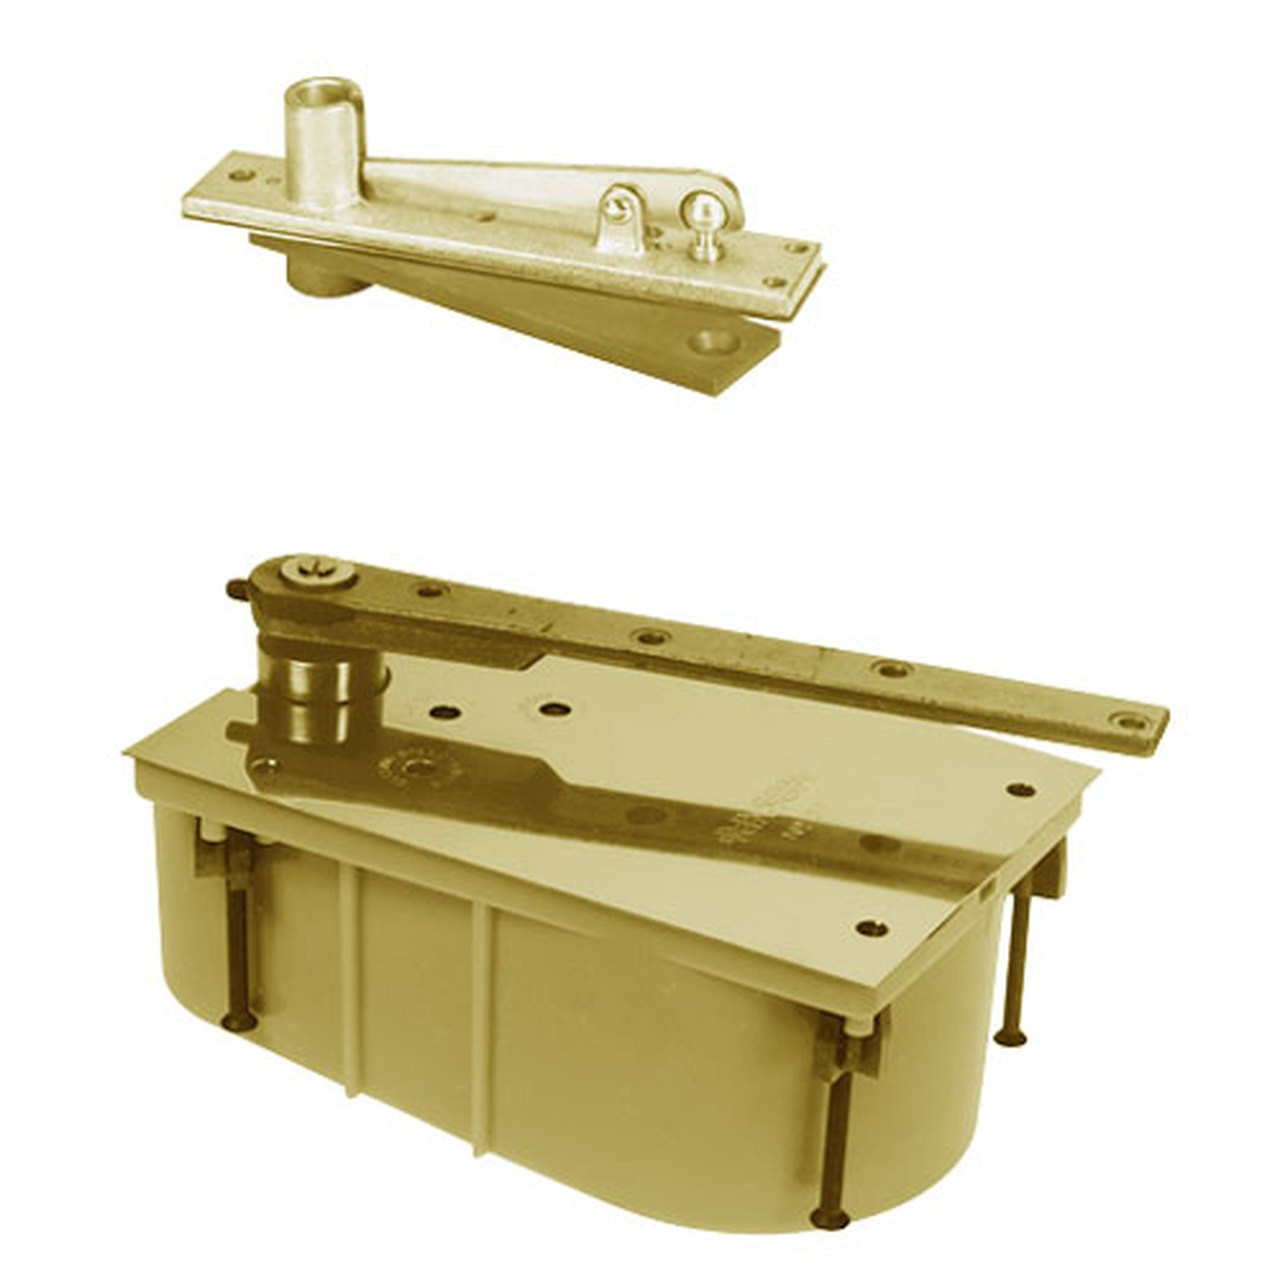 28-85N-554-LFP-LCC-RH-606 Rixson 28 Series Heavy Duty Single Acting Center Hung Floor Closer with Concealed Arm in Satin Brass Finish